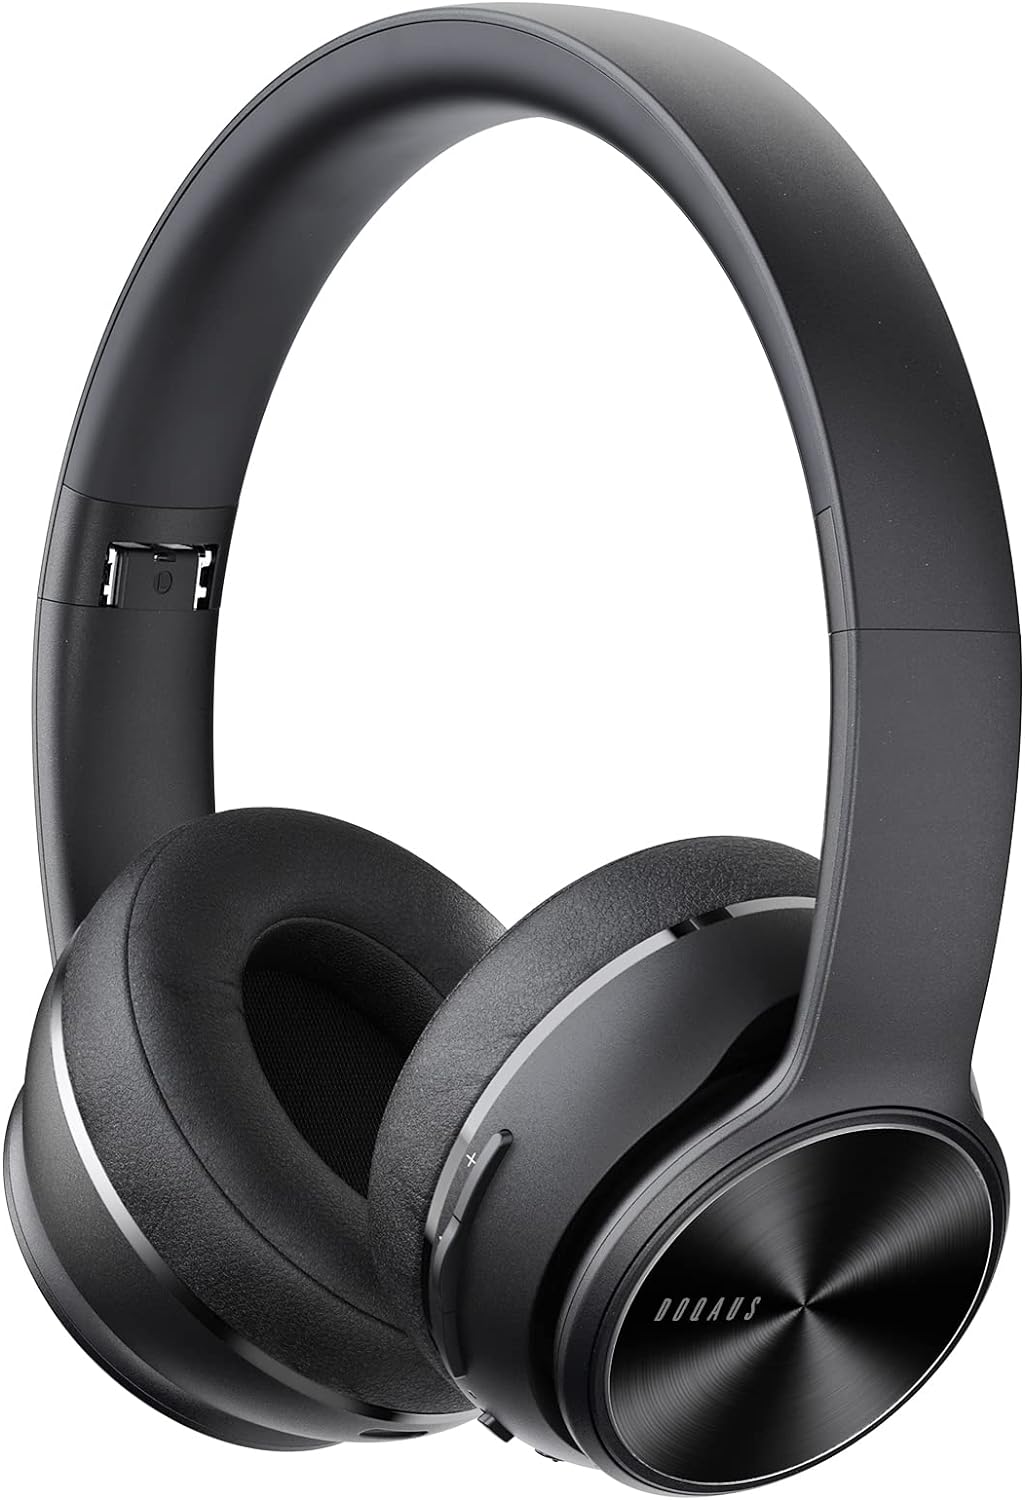 DOQAUS Bluetooth Headphones, Over Ear Wireless Headphones with 3 EQ Modes, Ultra-Soft Headphones Wireless, 40 Hrs Play Time, HiFi Stereo Foldable Headphones, Bluetooth Version 5.3 Suit for Phones/Pc